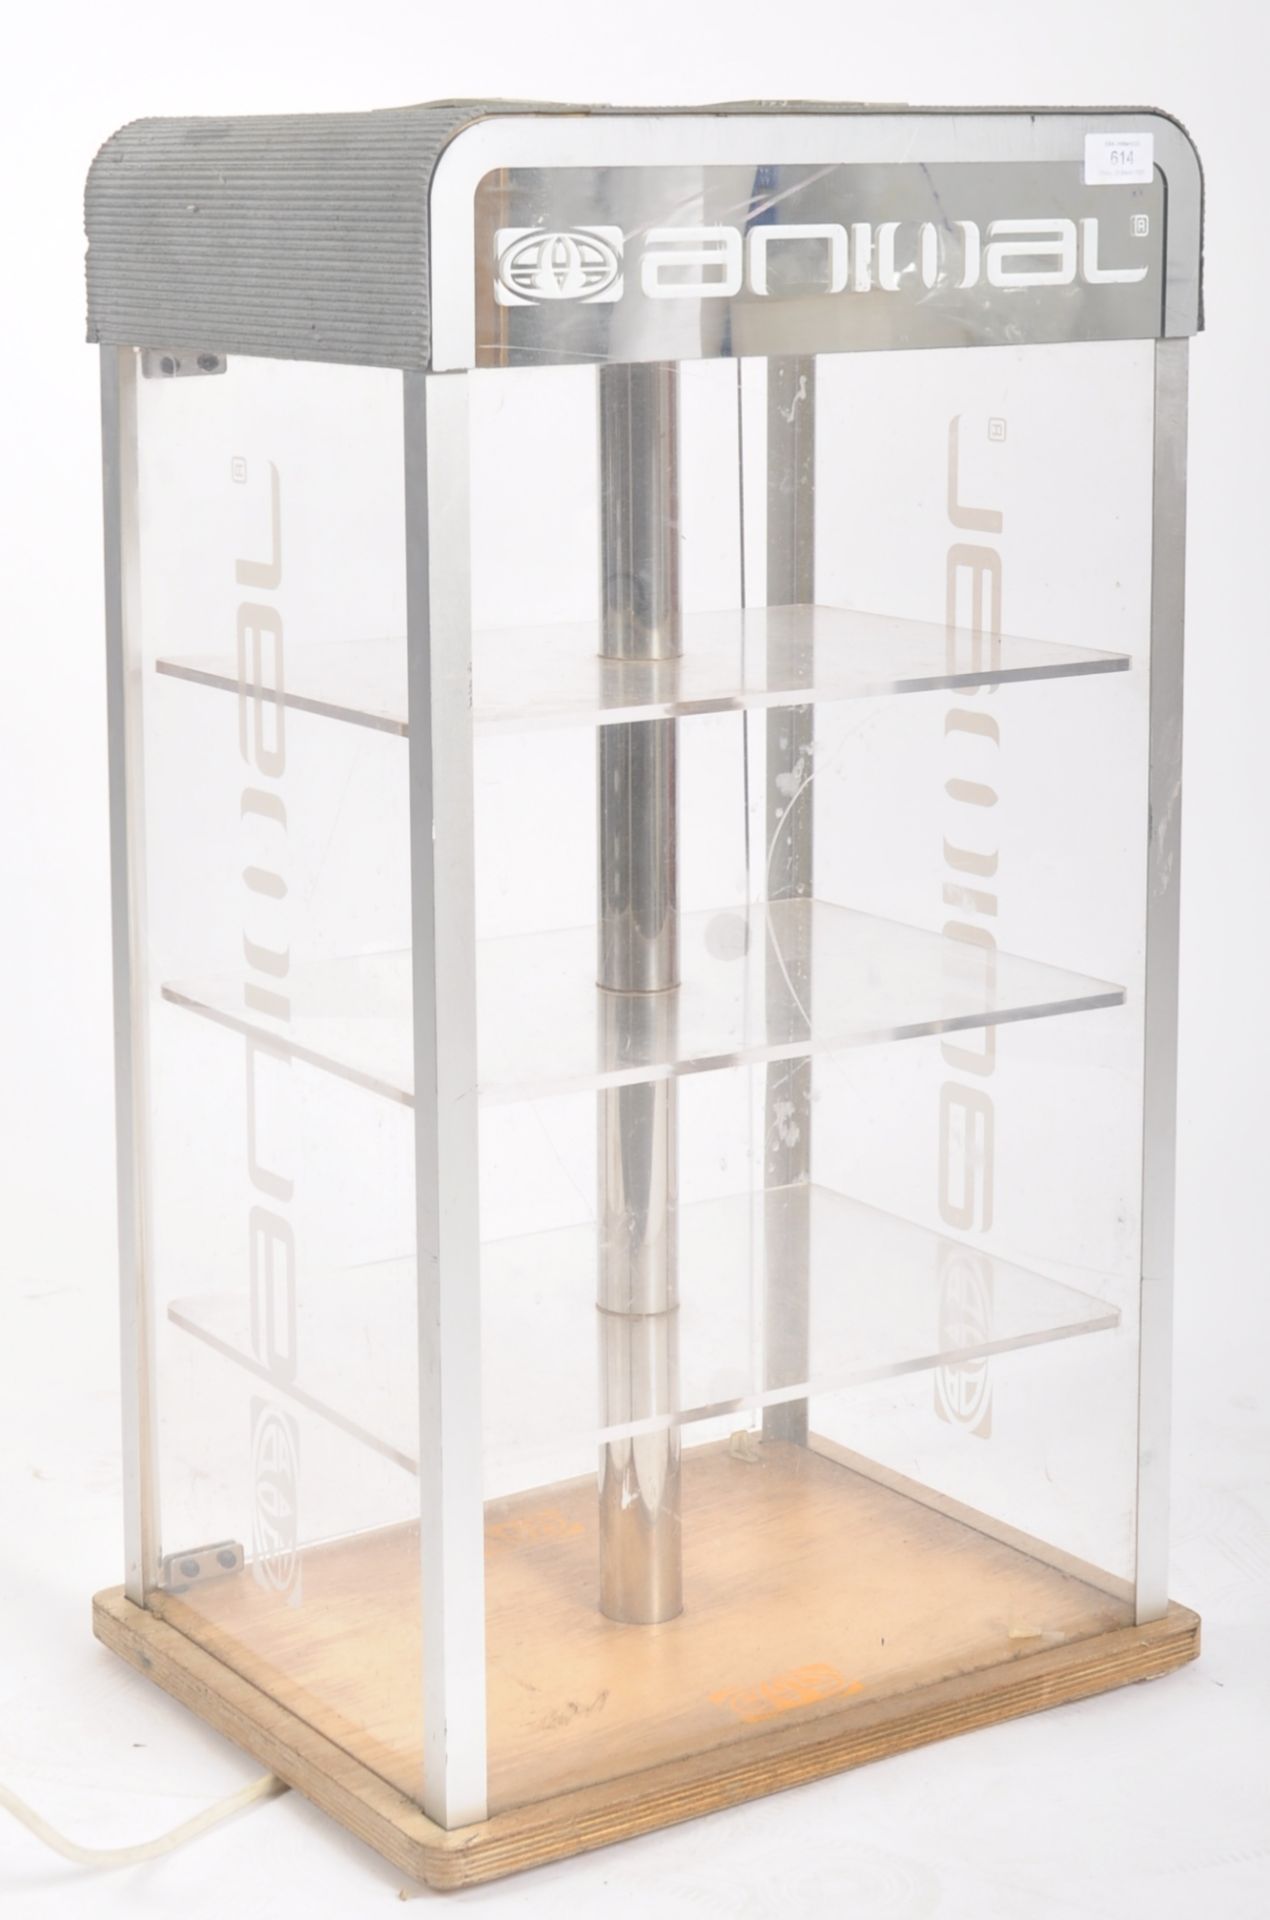 ANIMAL - CONTEMPORARY SHOP DISPLAY GLASS CABINET - Image 5 of 5